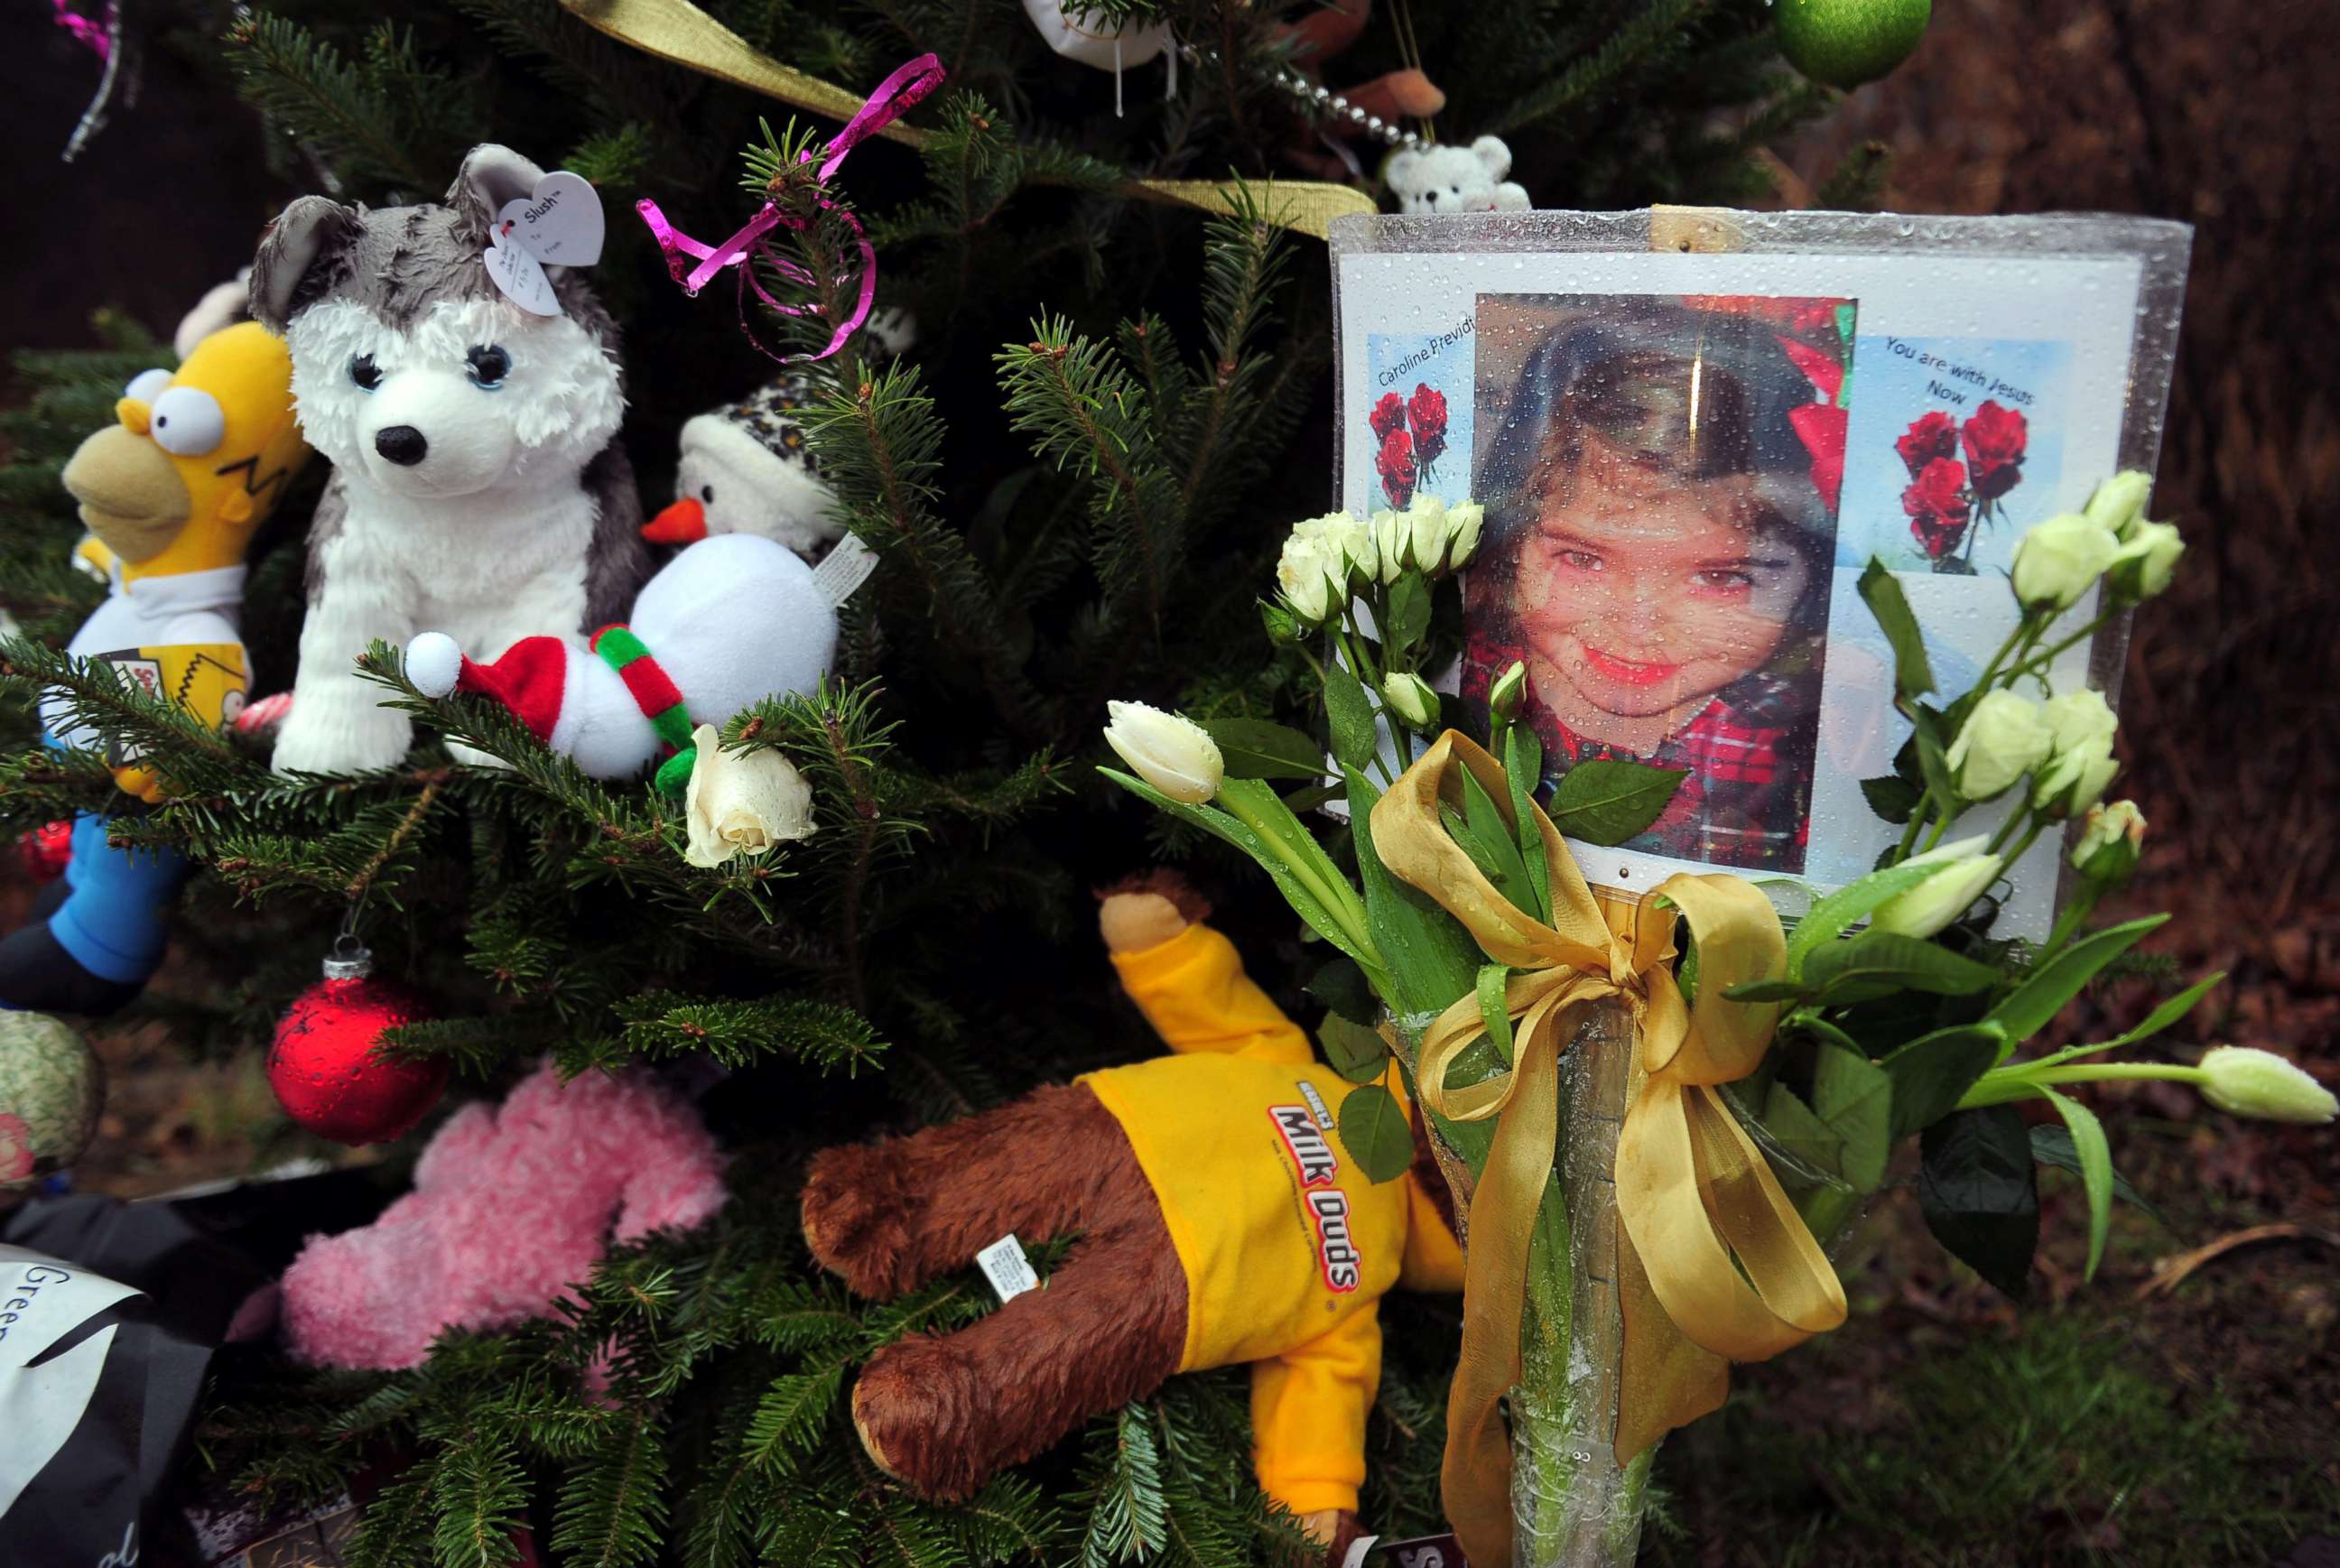 PHOTO: A photo of Caroline Previdi, one of the victims from the Sandy Hook elementary school shooting is set up at a makeshift shrine to the victims in Newtown, Conn., Dec. 17, 2012.